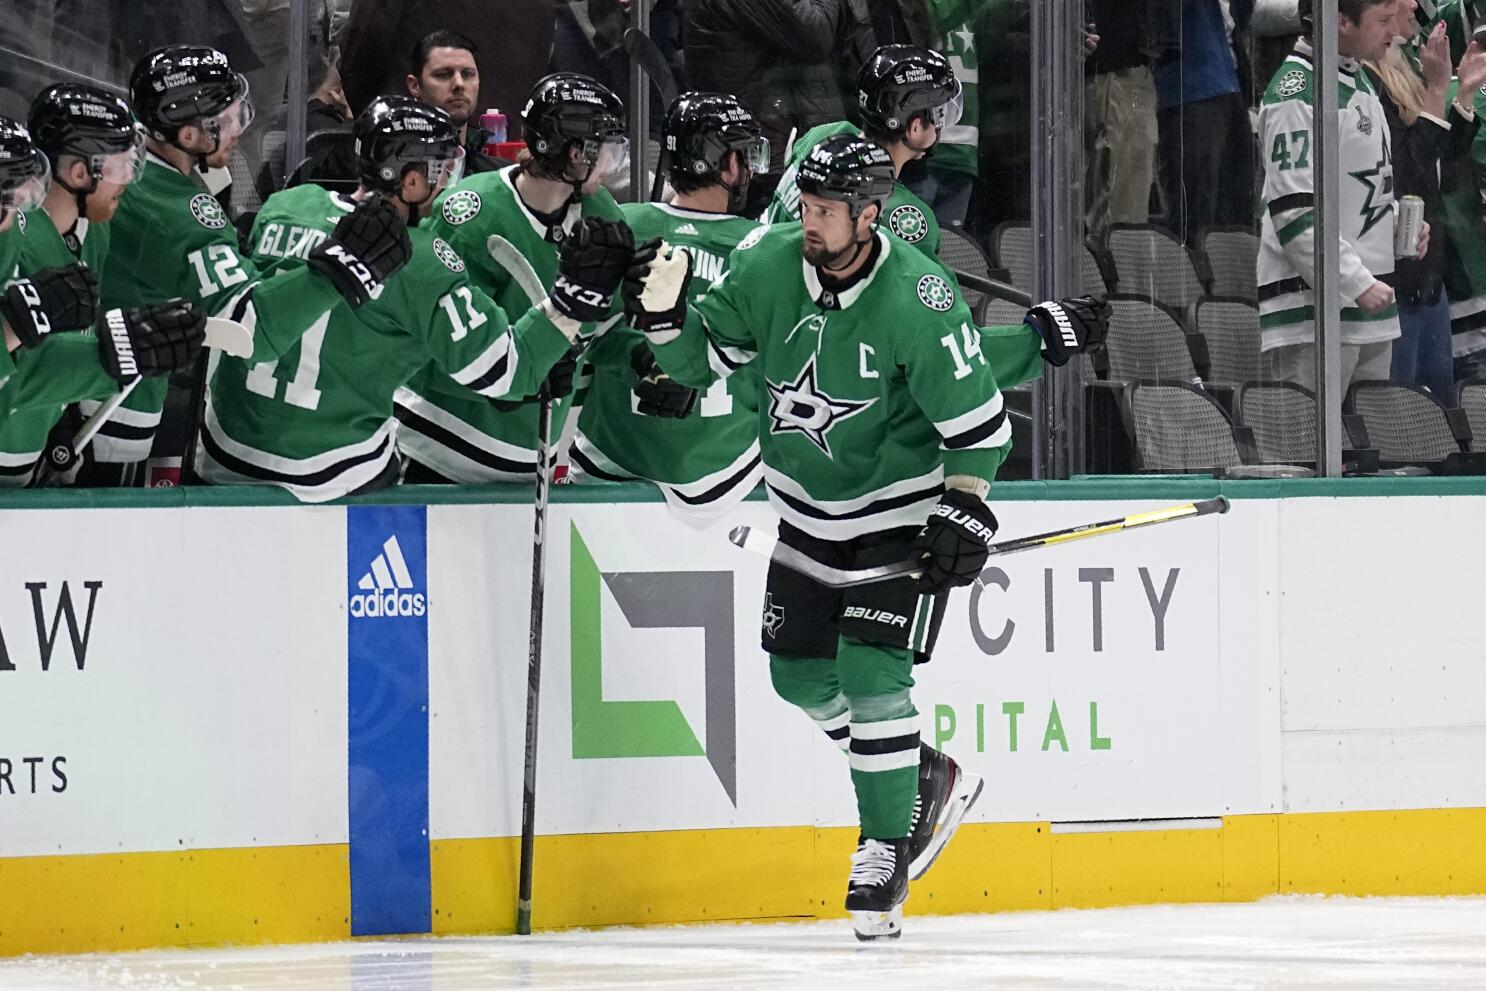 The Dallas Stars can't handle the Hurricanes as they lose 5-4 in OT